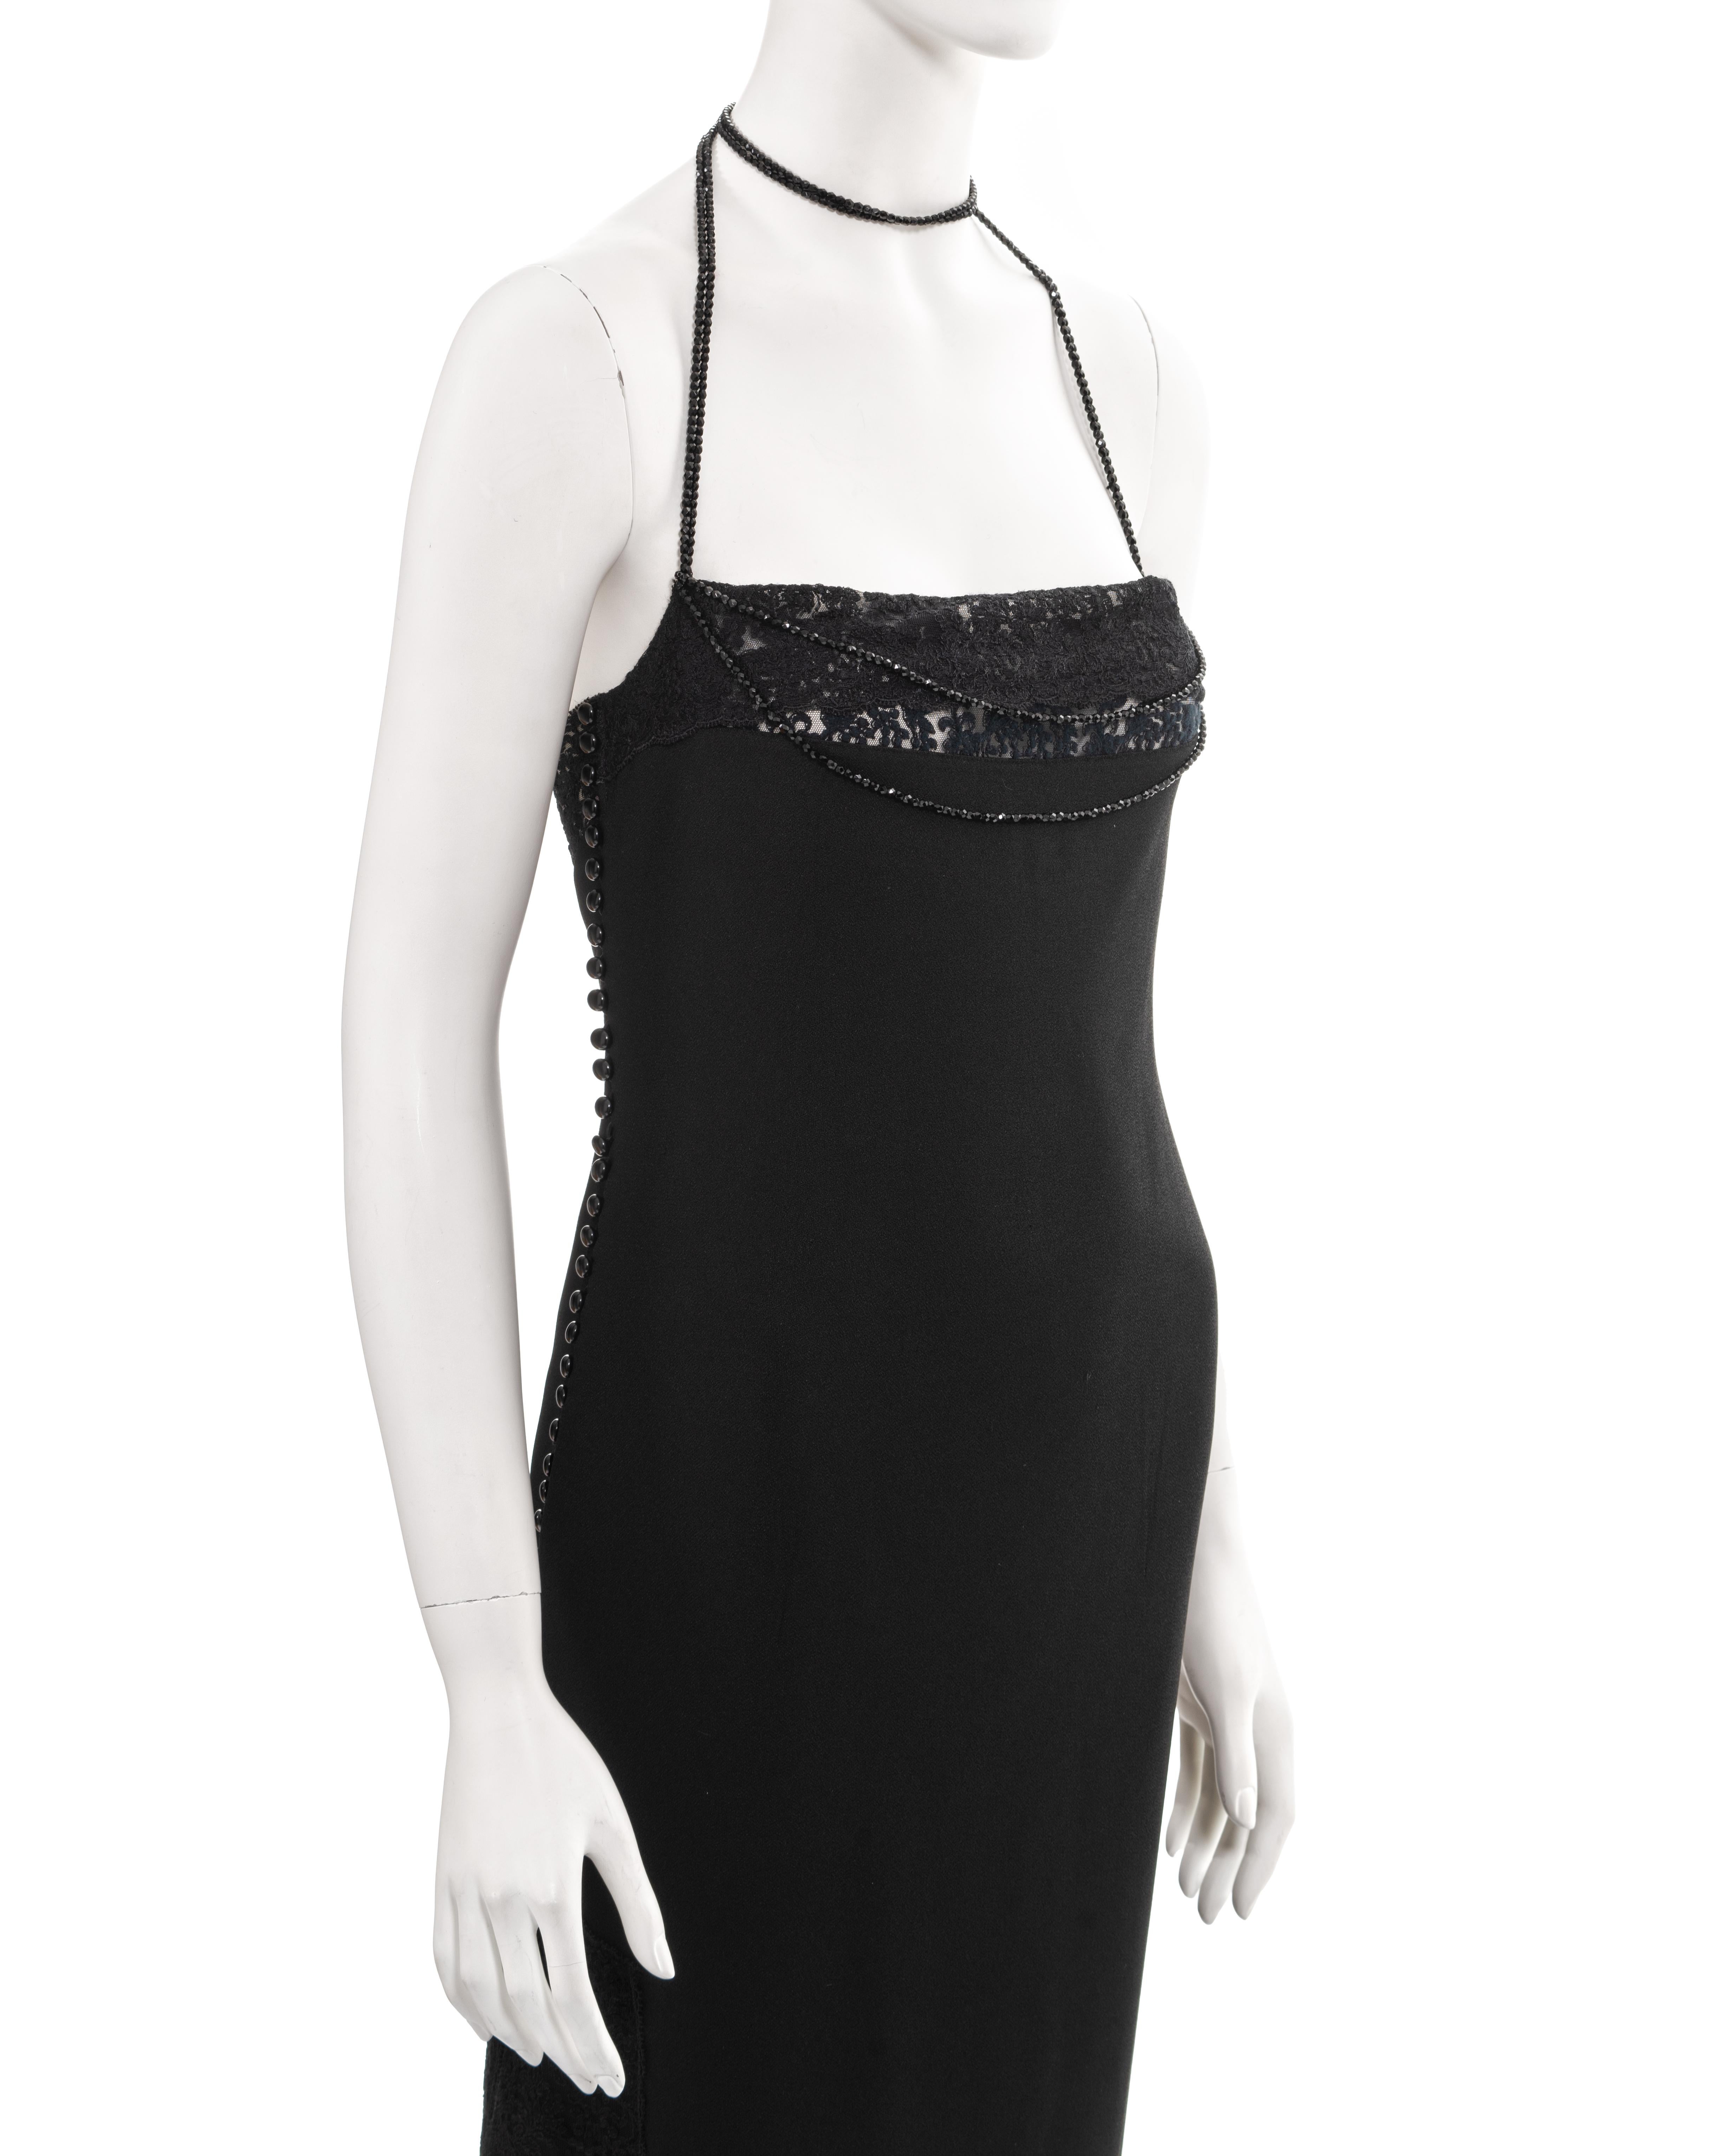 Christian Dior by John Galliano black crepe and lace evening dress, fw 1997 For Sale 2